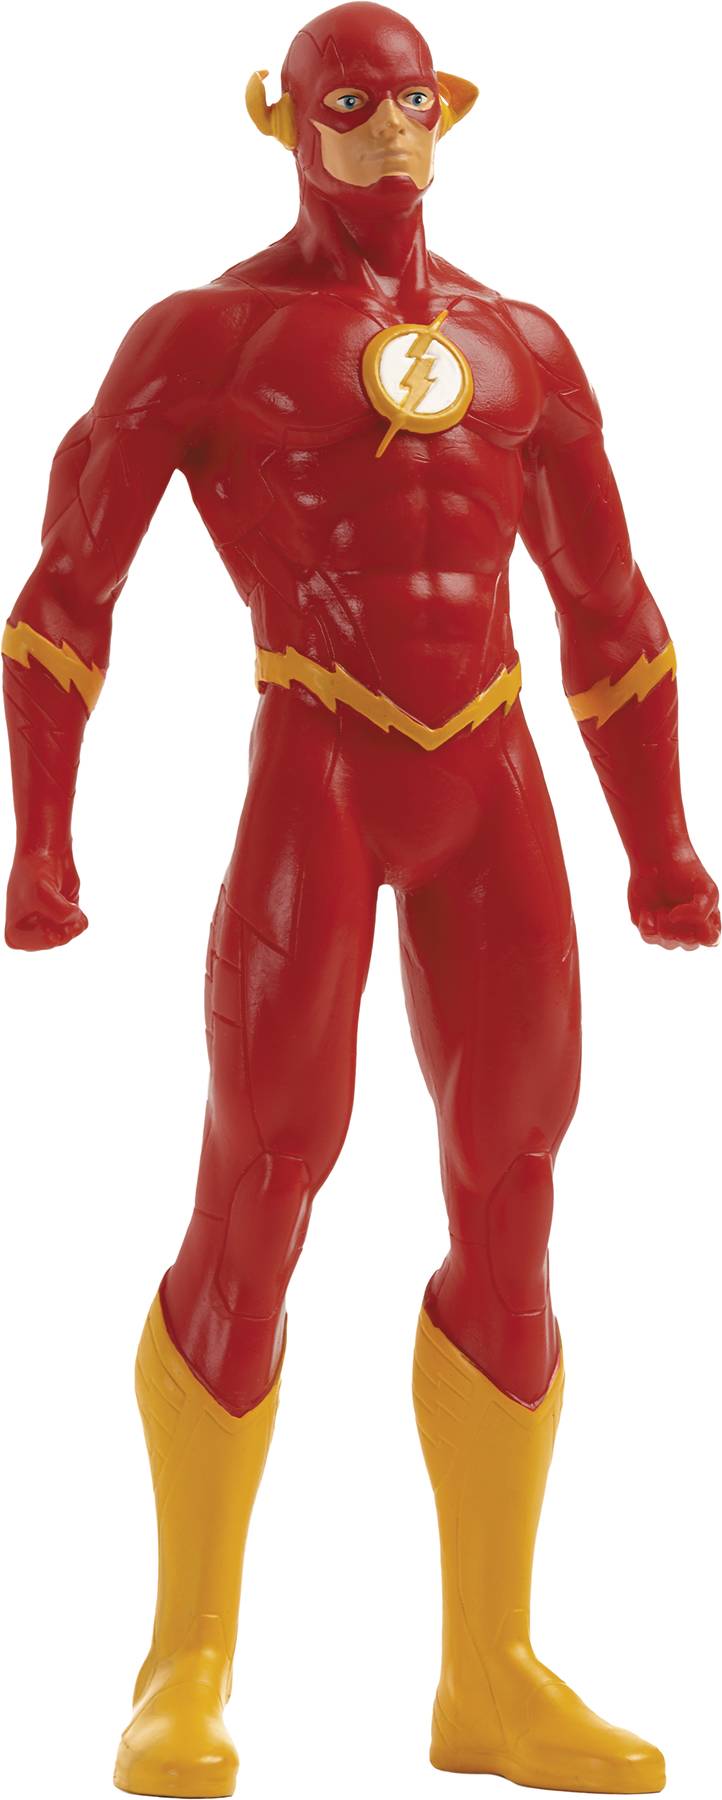 DC JUSTICE LEAGUE 8IN BENDABLE FIGURE - THE FLASH